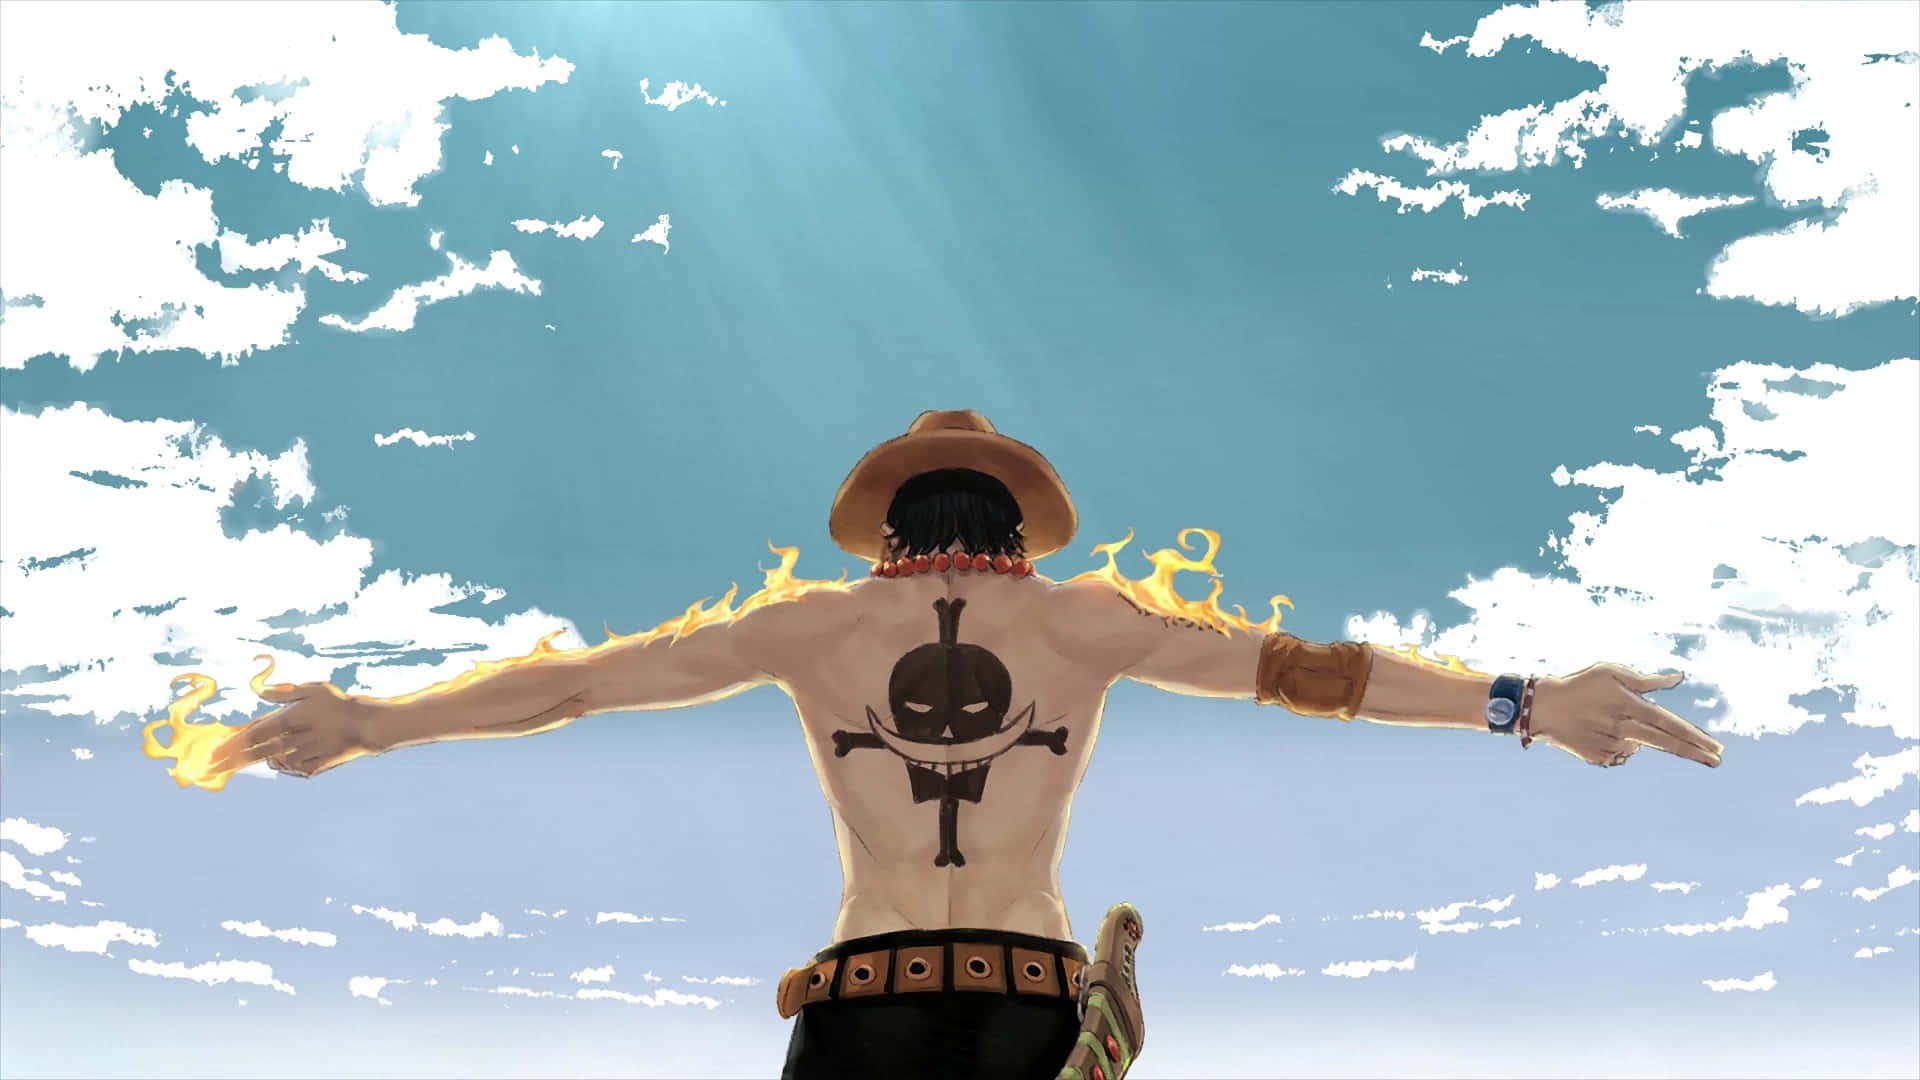 Portgas D. Ace, The Strongest Member Of Whitebeard's Pirate Crew Background